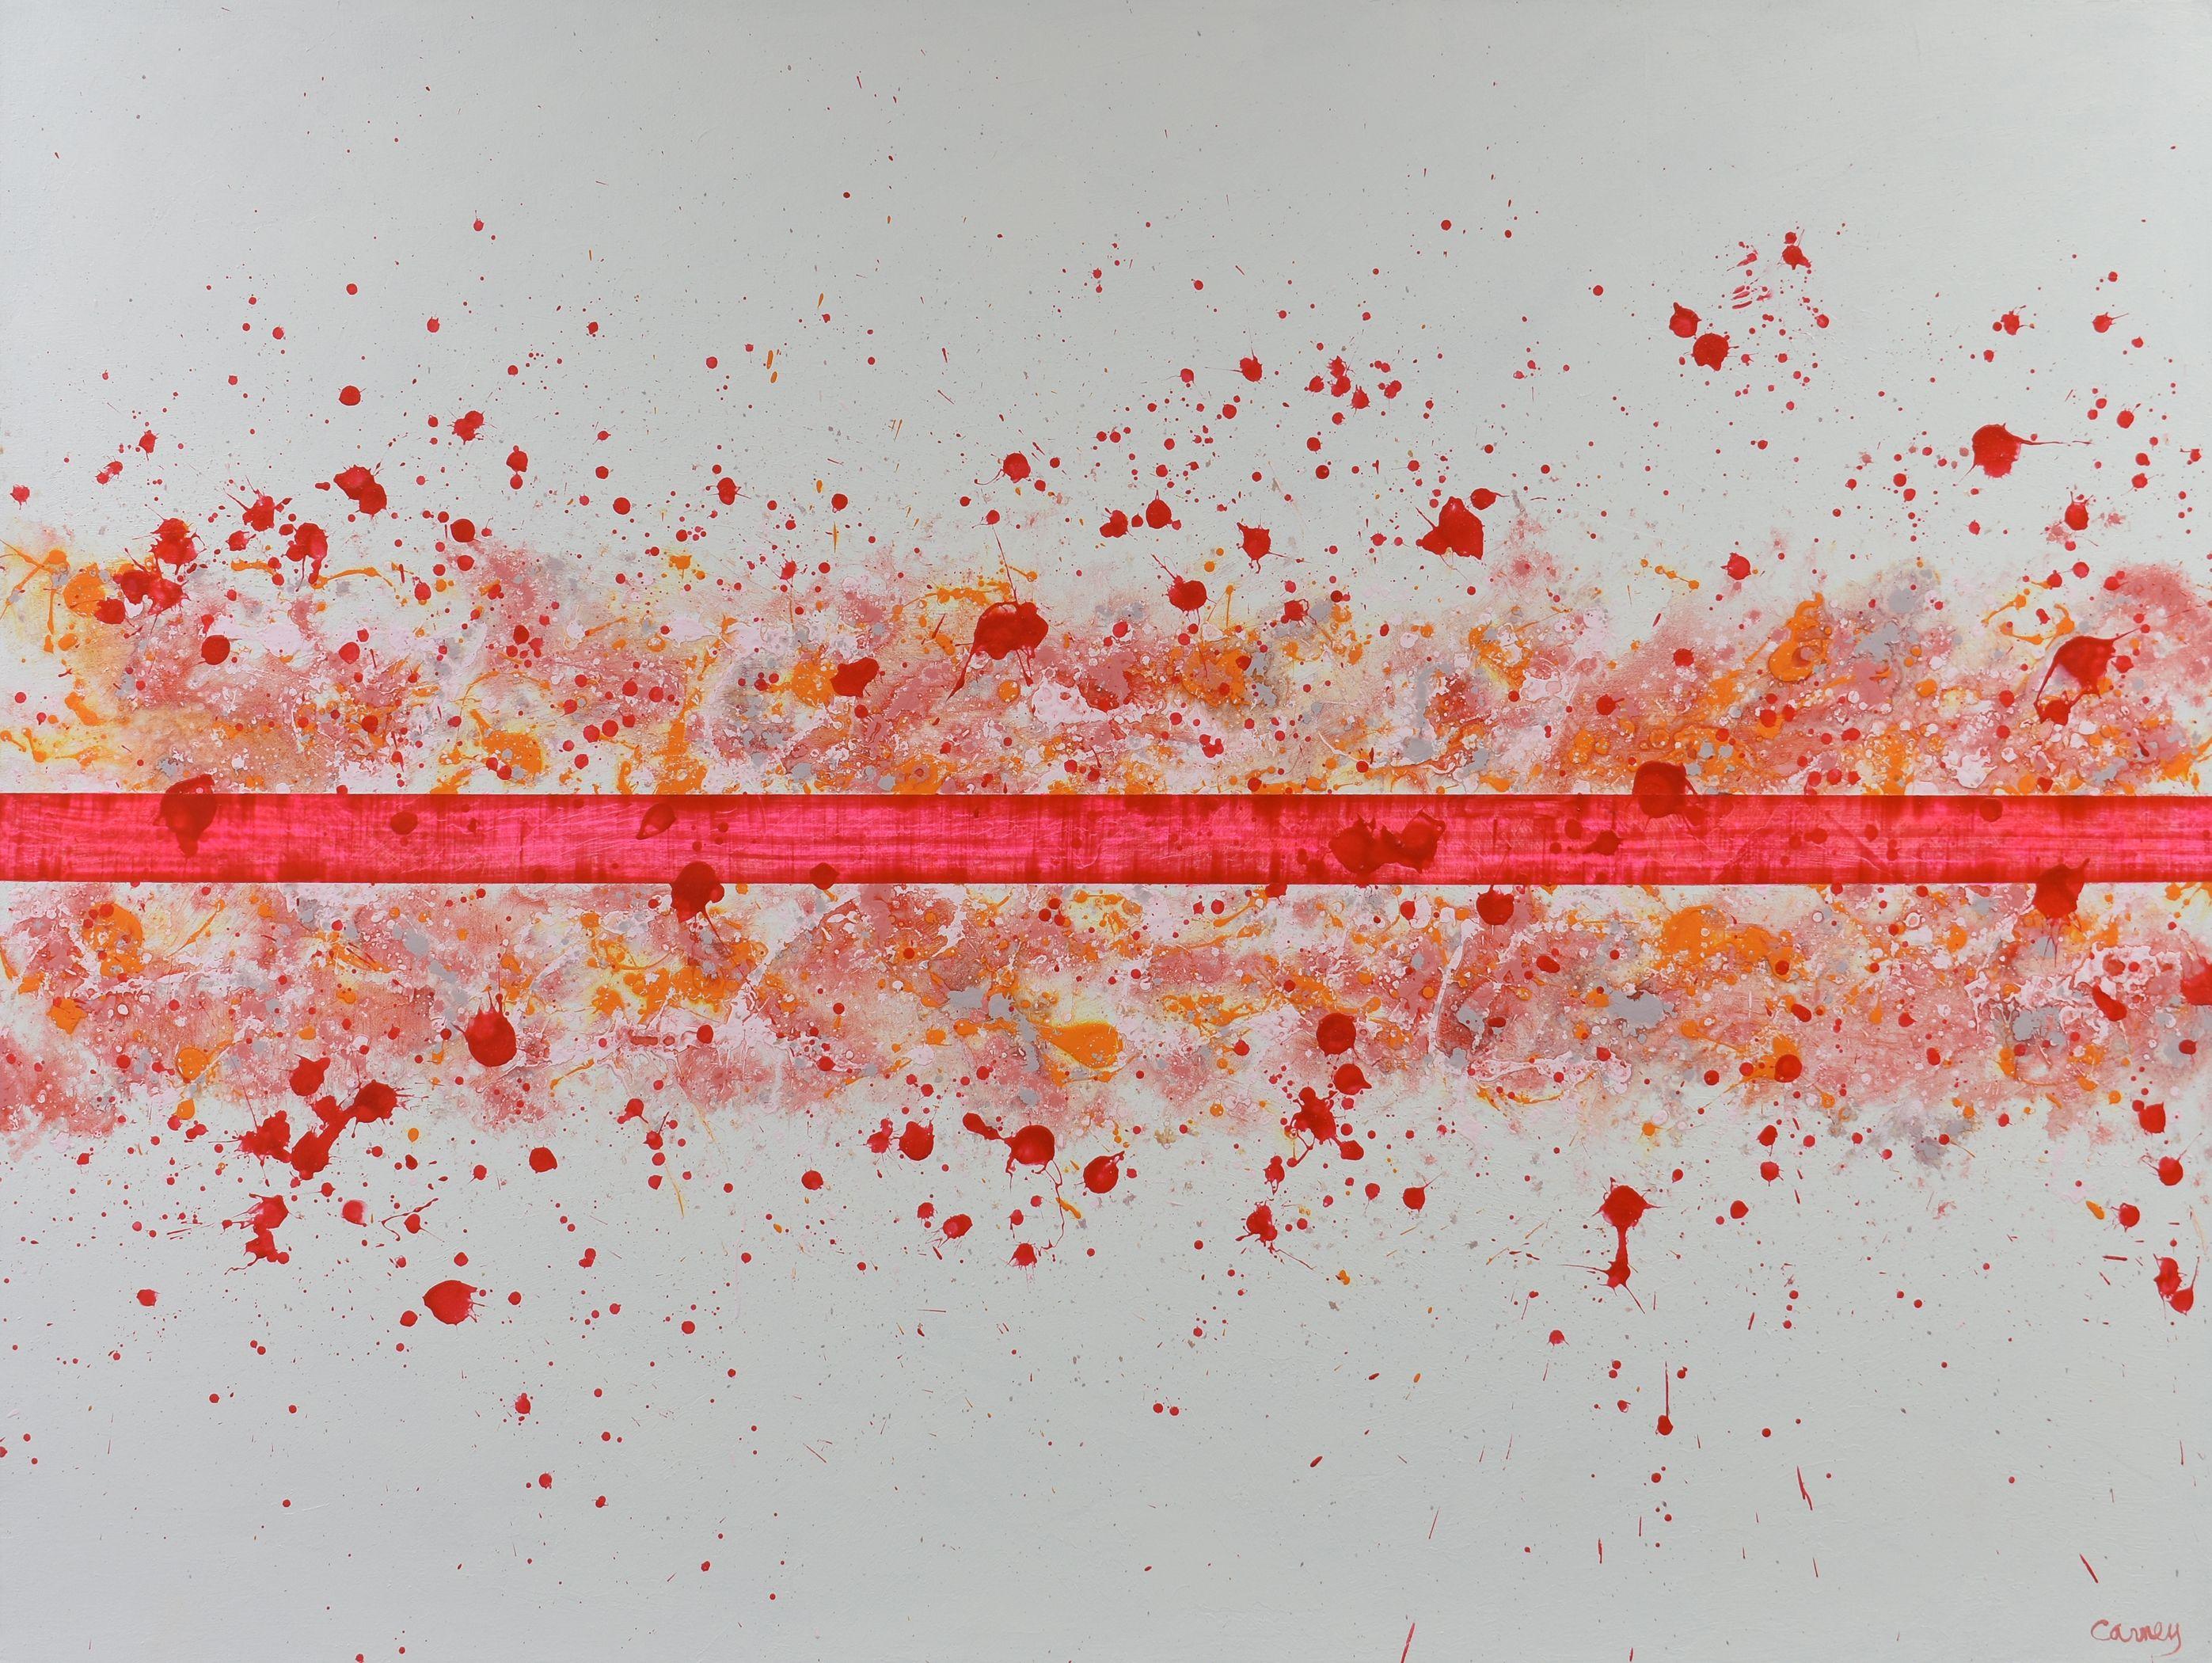 Rouge Desir is a large abstract painting in acrylic on canvas. The work features a bright color palette of fluorescent pinks and reds on a textured white background. It is the last creation of 2019.    For the creation of this piece, professional